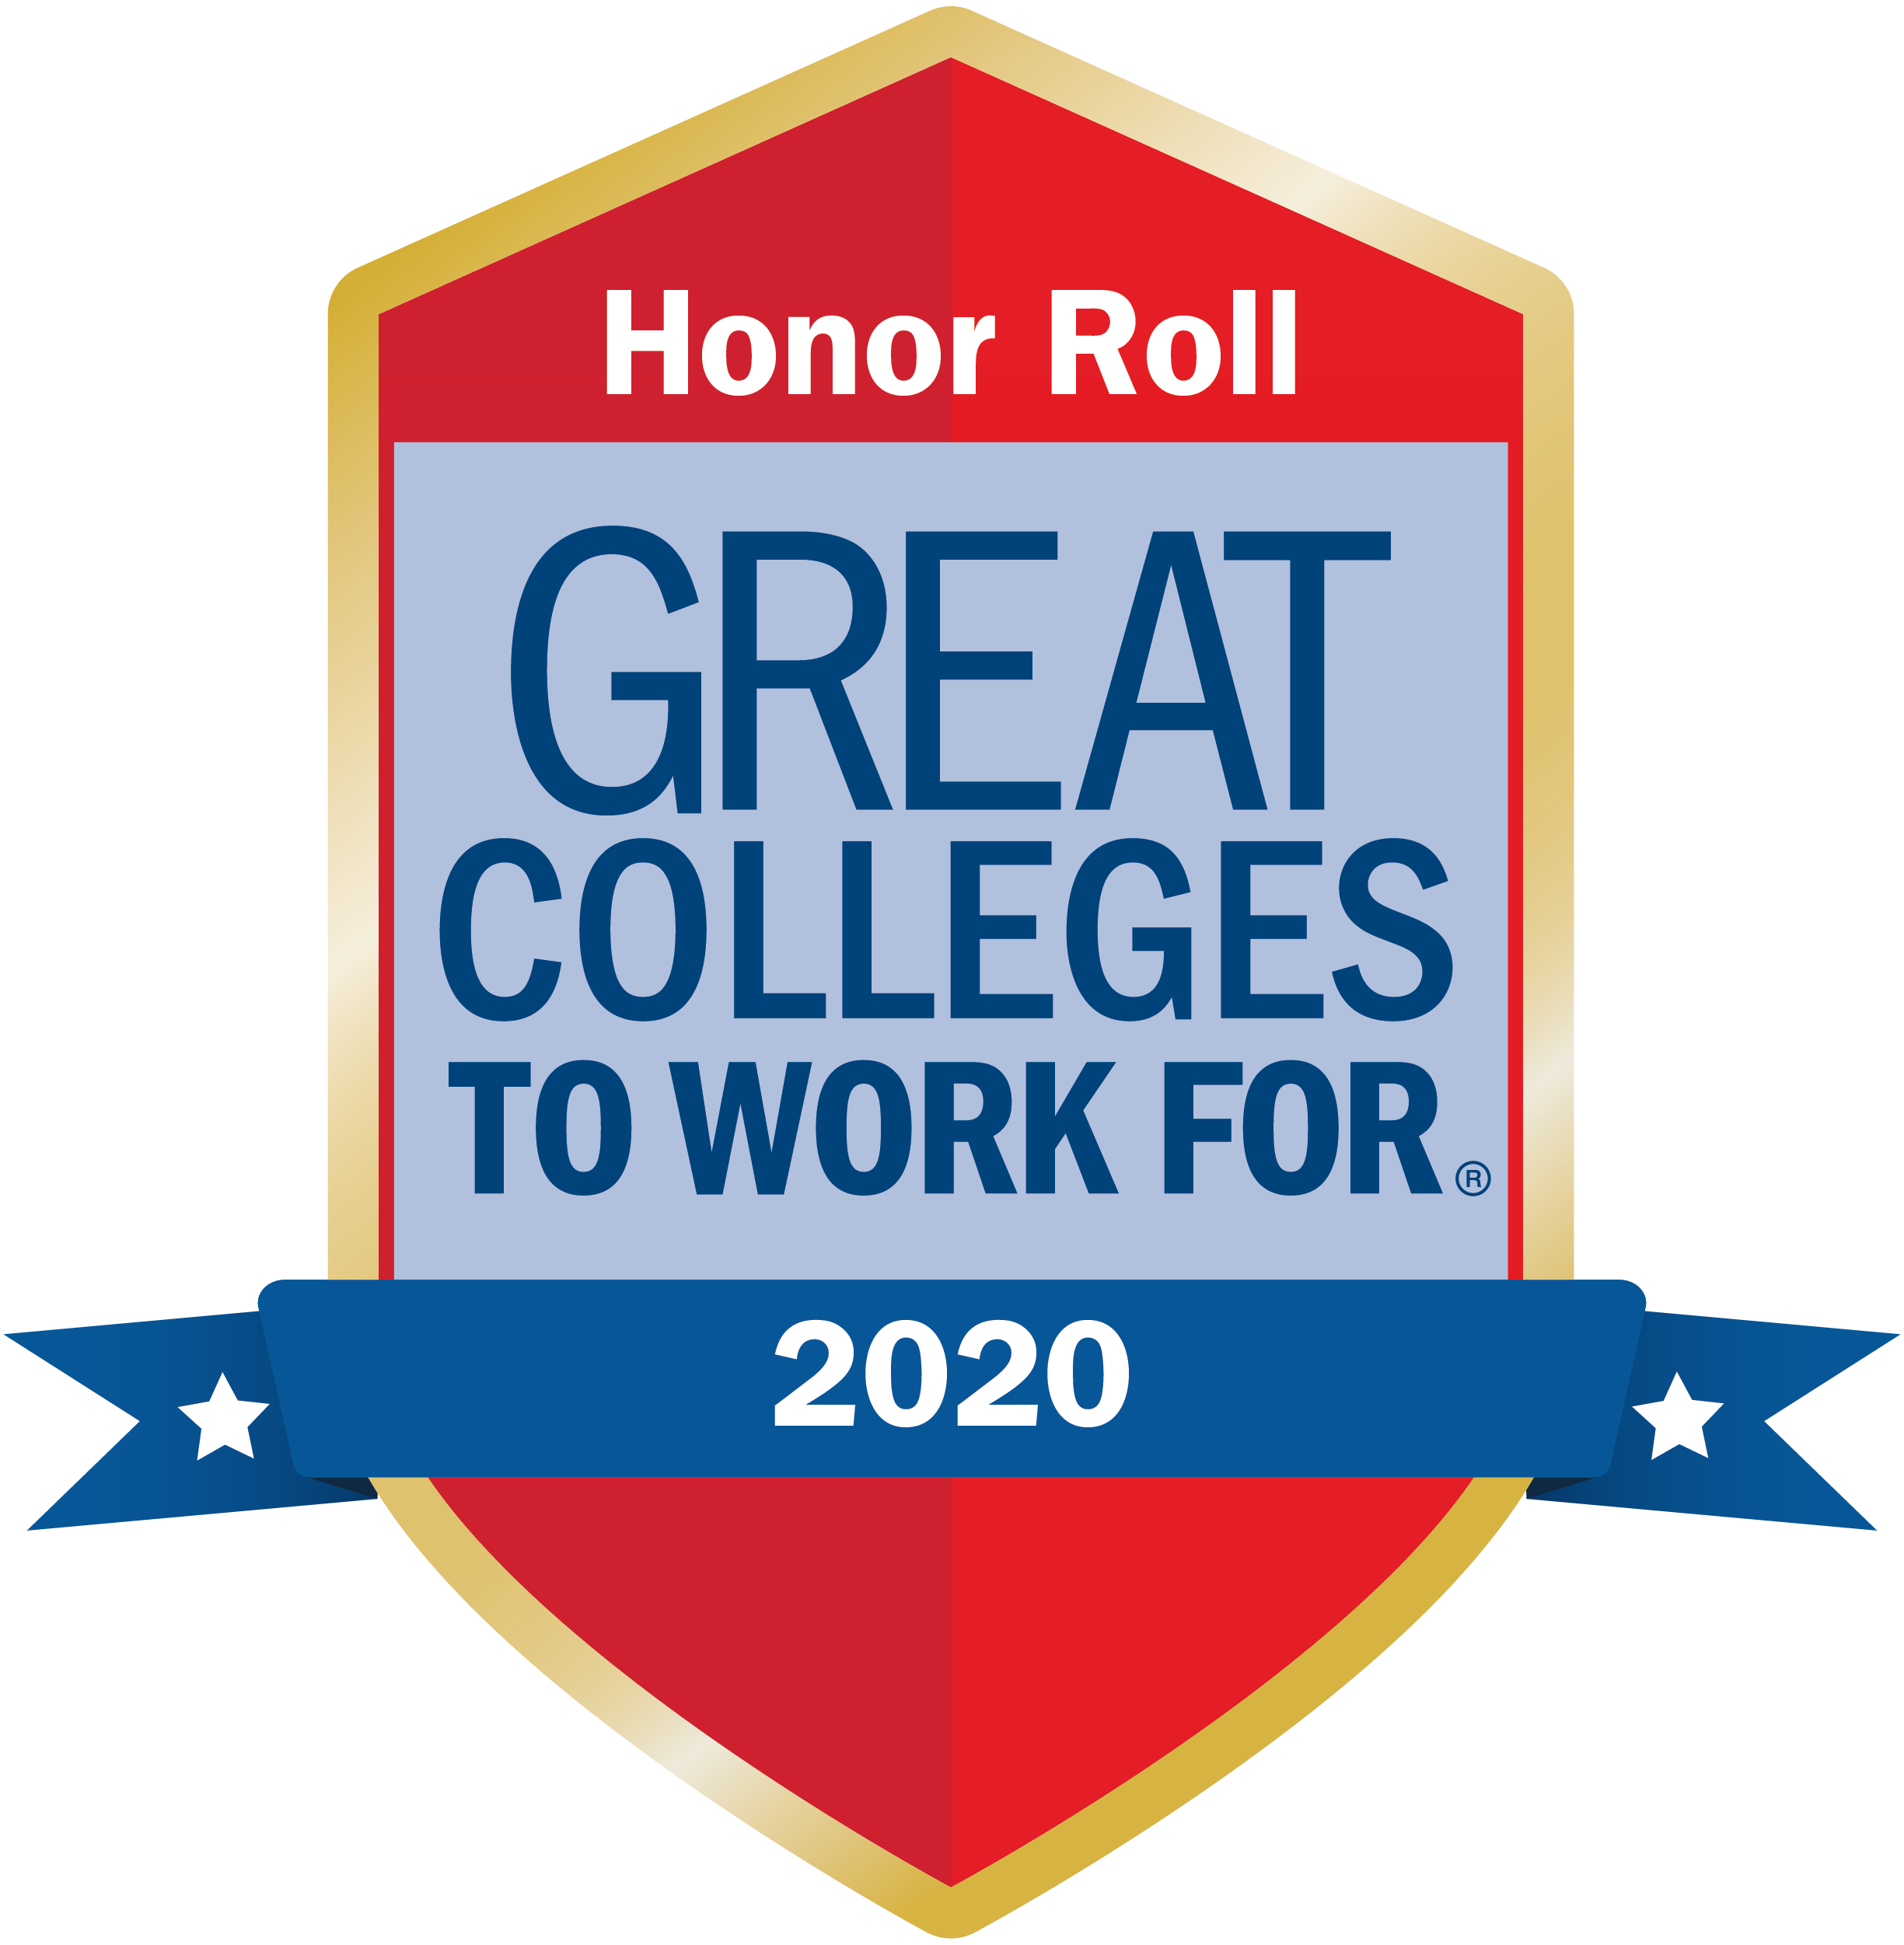 Great Colleges to Work For 2020 Honor Roll badge